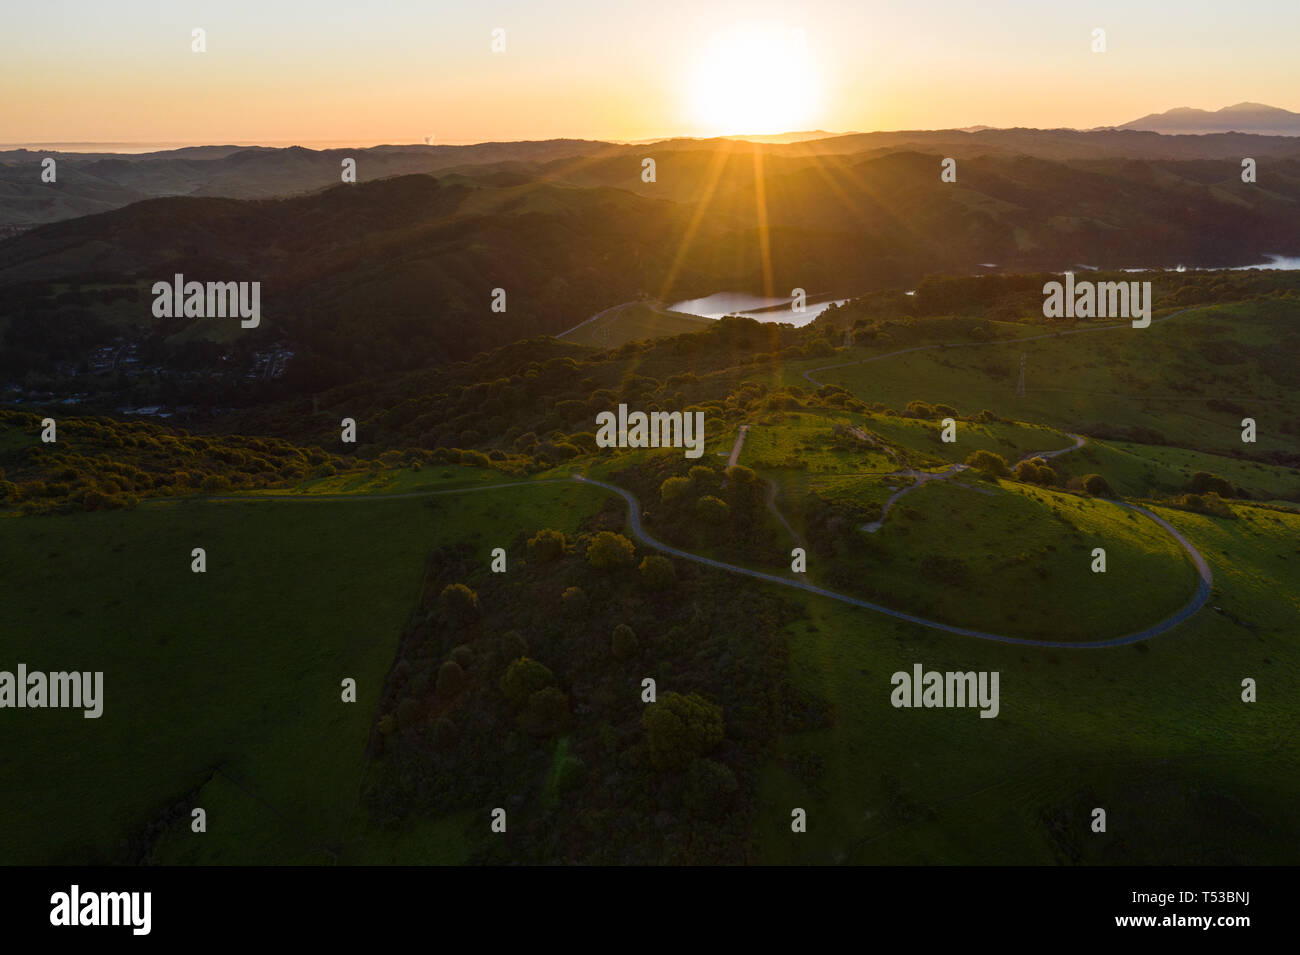 A beautiful dawn breaks over the green hills around the San Pablo Reservoir in Northern California. A wet winter has caused lush vegetation growth. Stock Photo